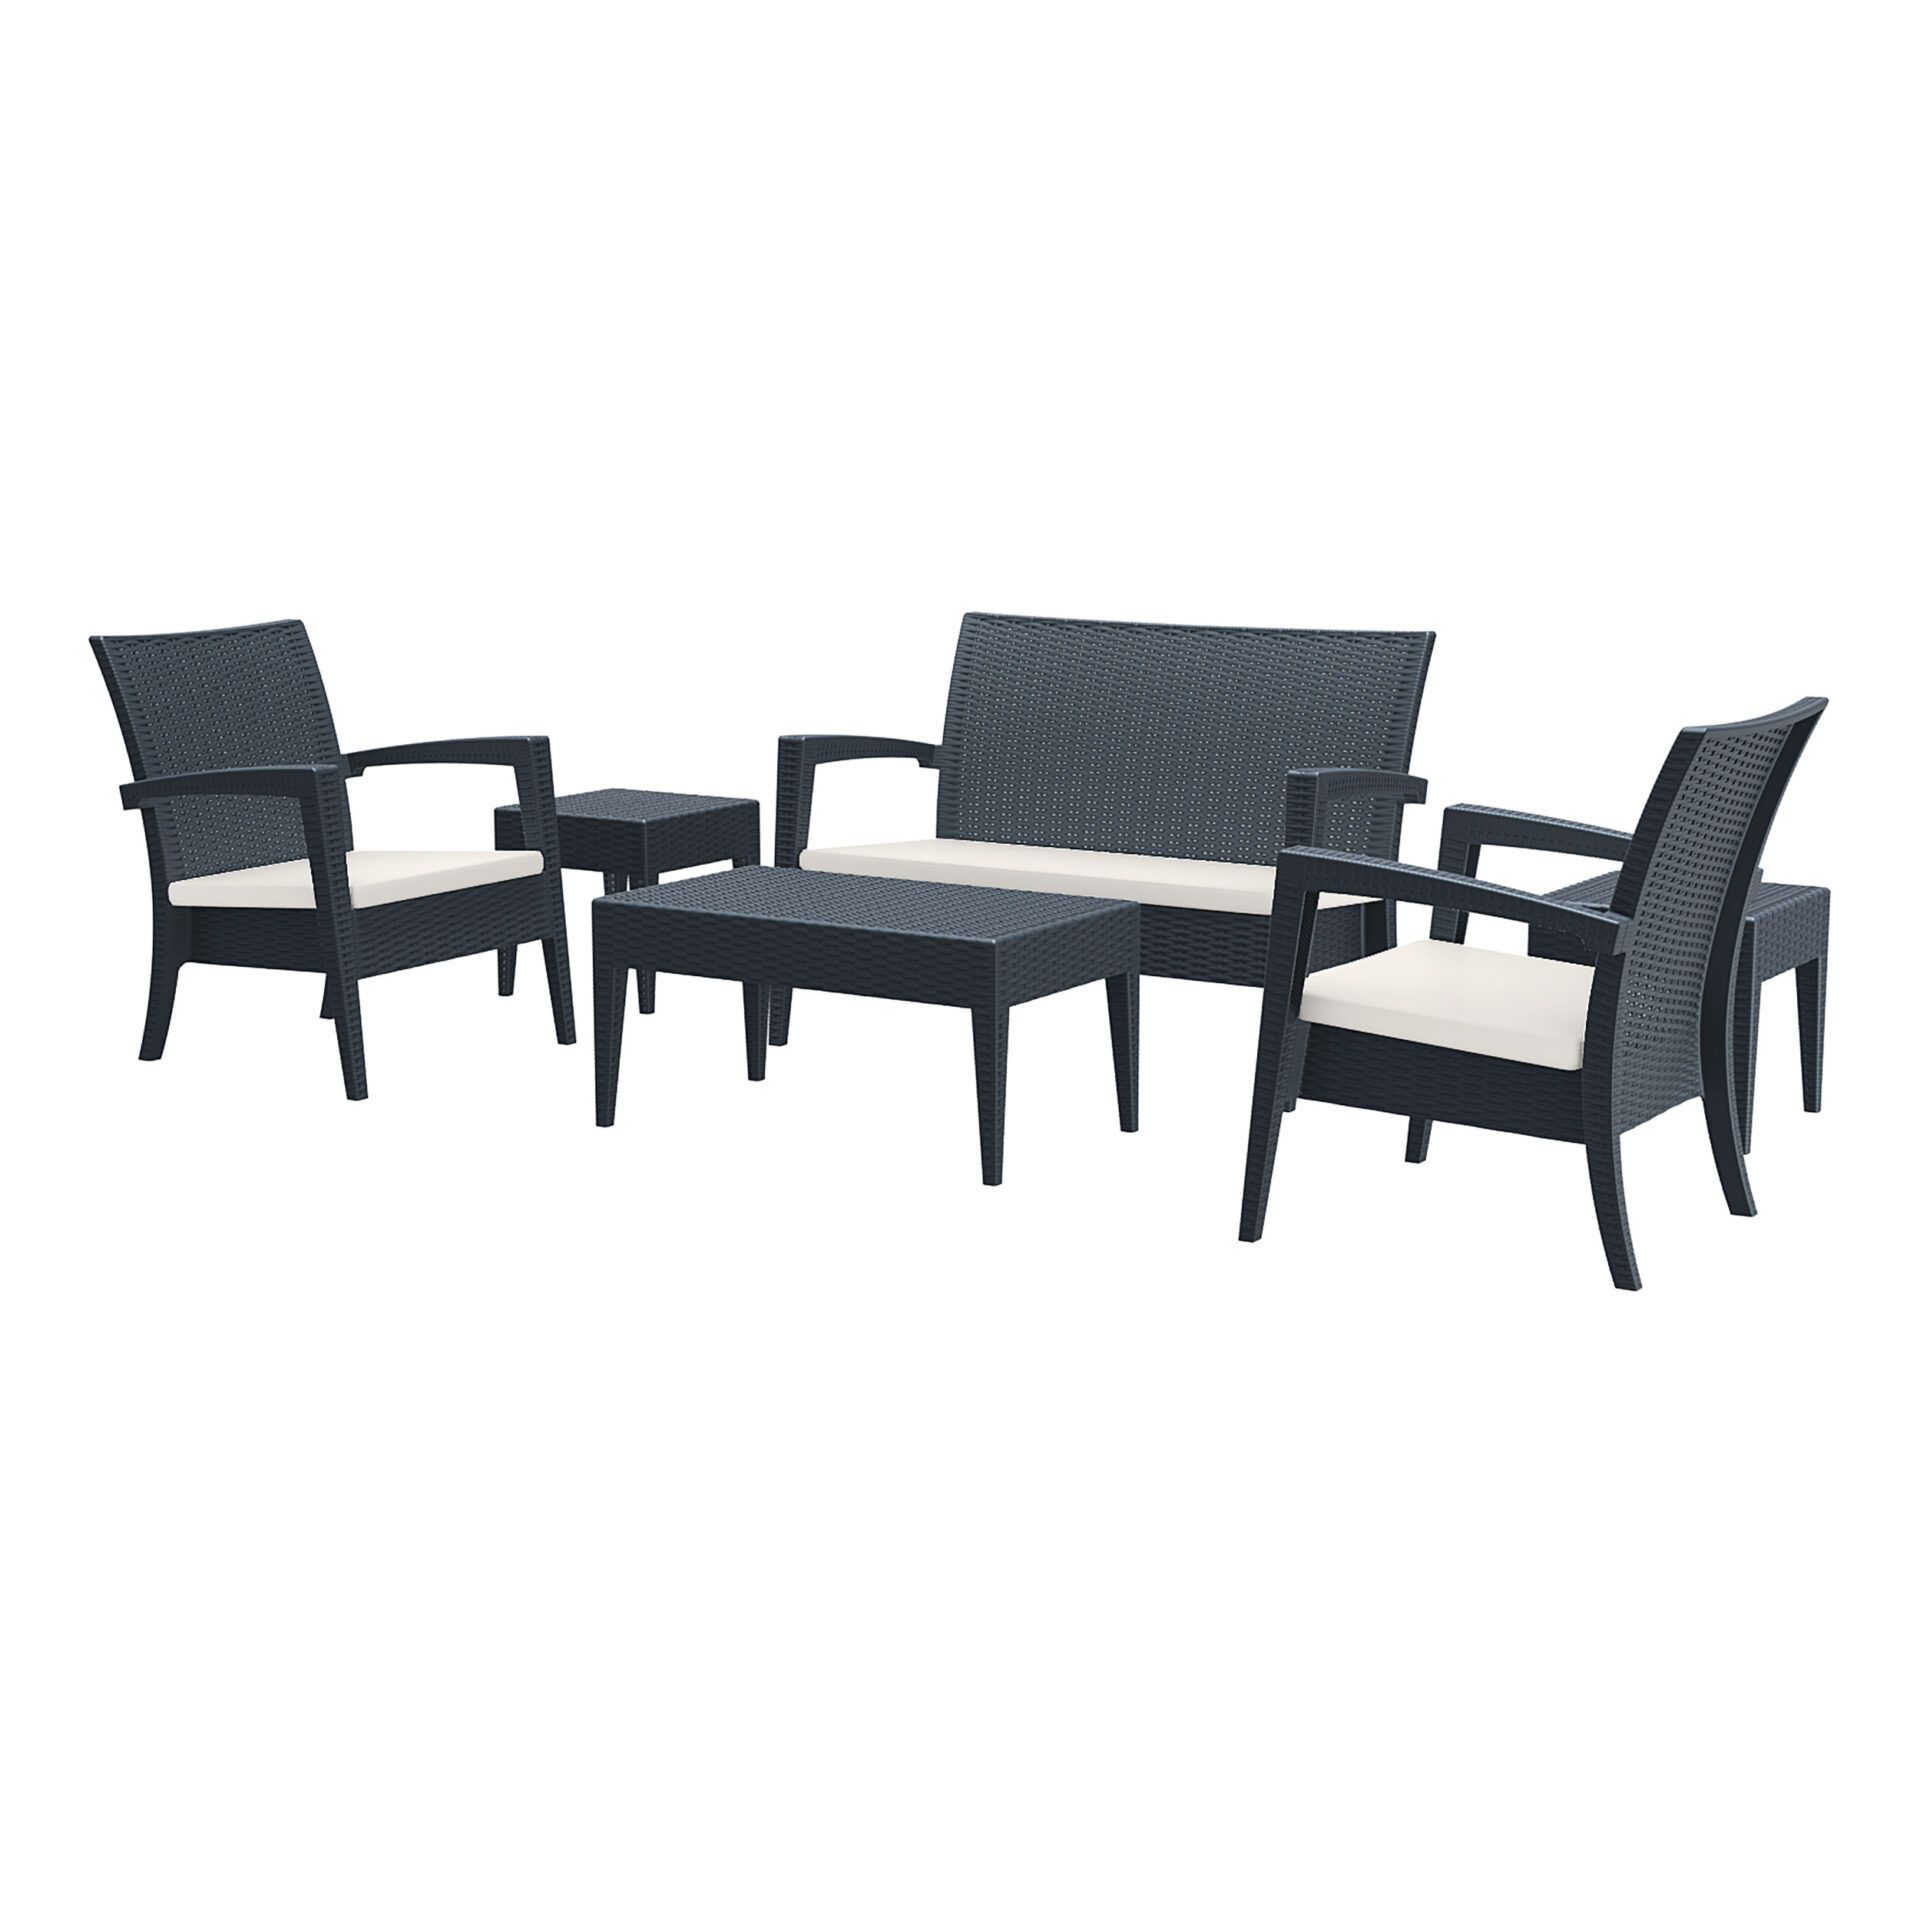 Tequila Lounge Set - Anthracite with cushions